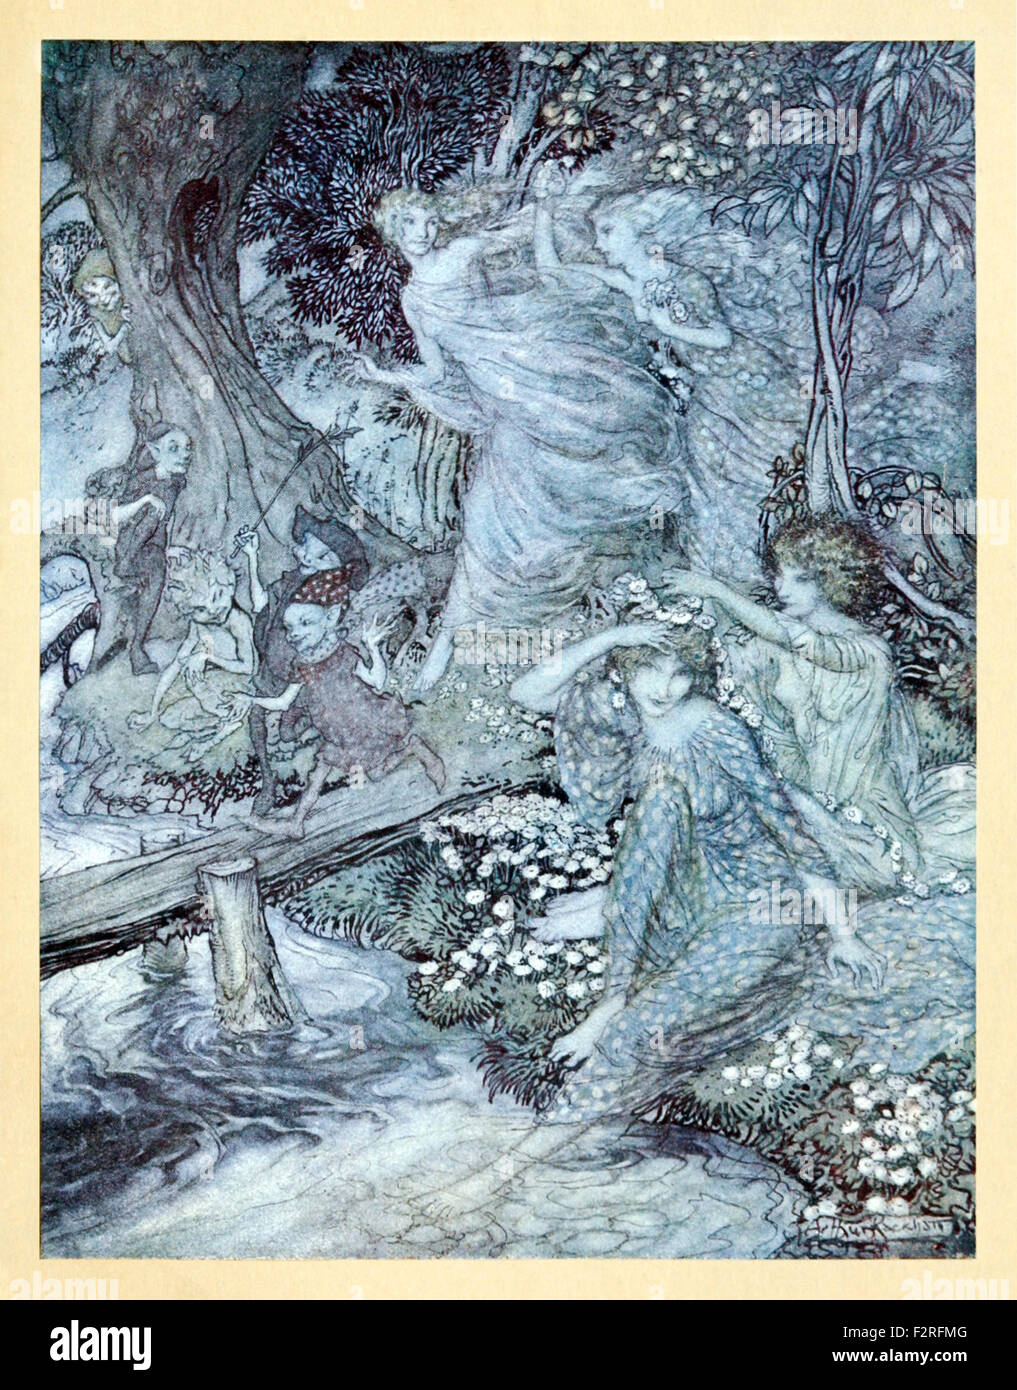 'By dimpled Brook, and Fountain brim, The Wood-Nymphs, deckt with Daisies trim, Their merry wakes and pastimes keep' from 'Comus' by John Milton, illustration by Arthur Rackham (1867-1939). See description for more information. Stock Photo